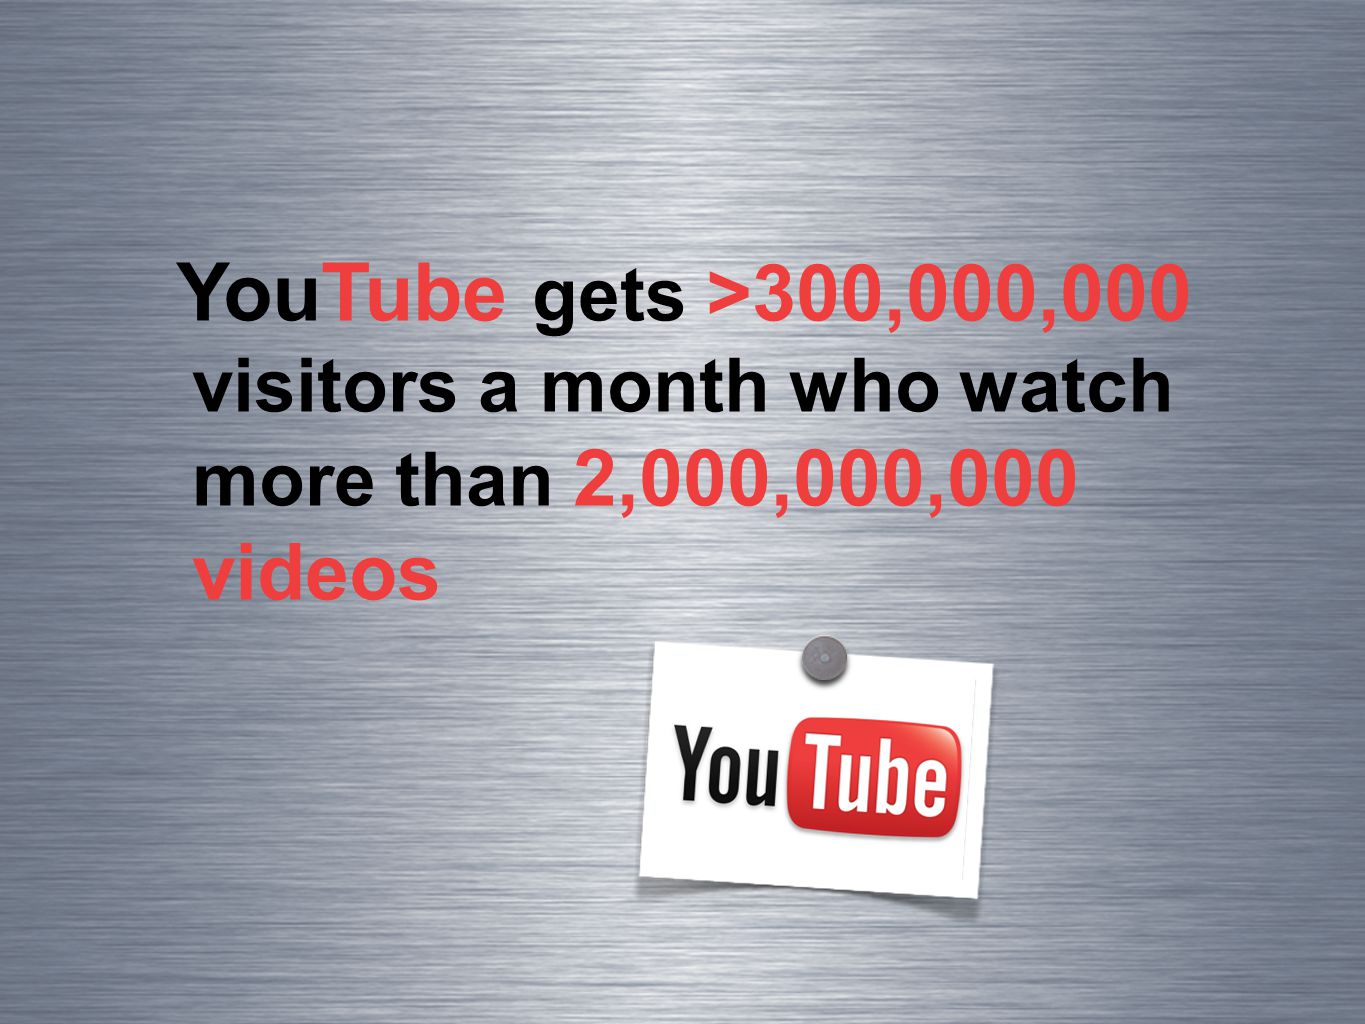 YouTube gets >300,000,000 visitors a month who watch more than 2,000,000,000 videos